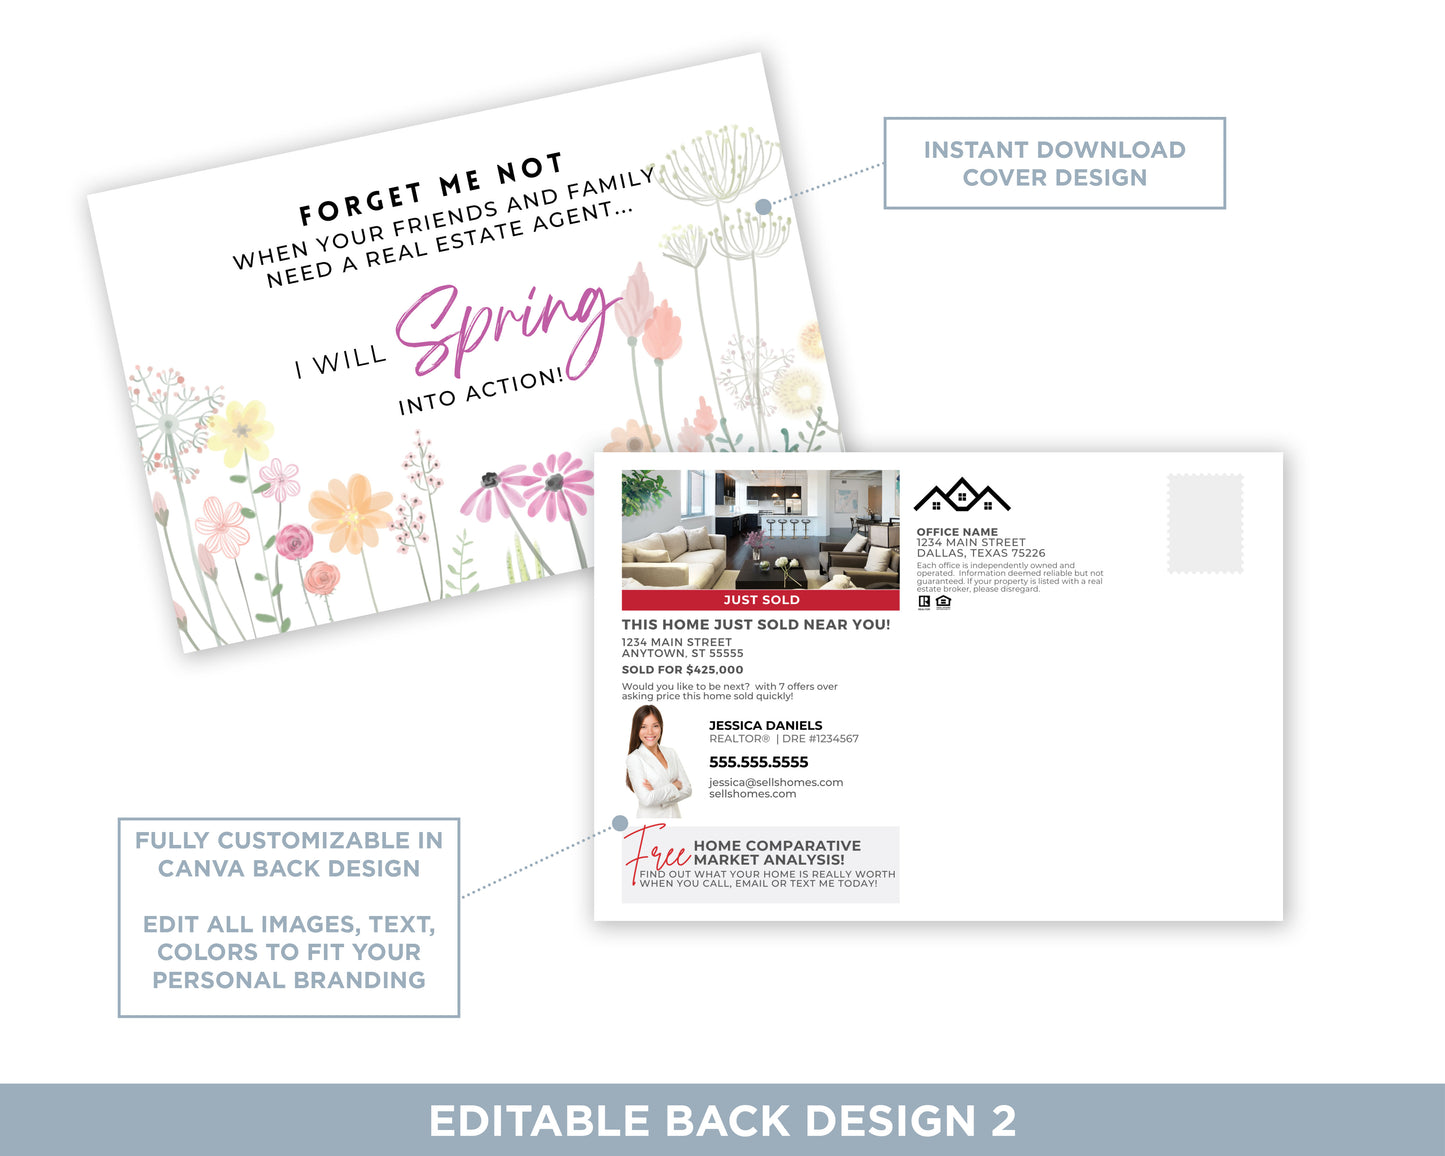 Forget Me Not | Real Estate Spring Referral Postcard Template